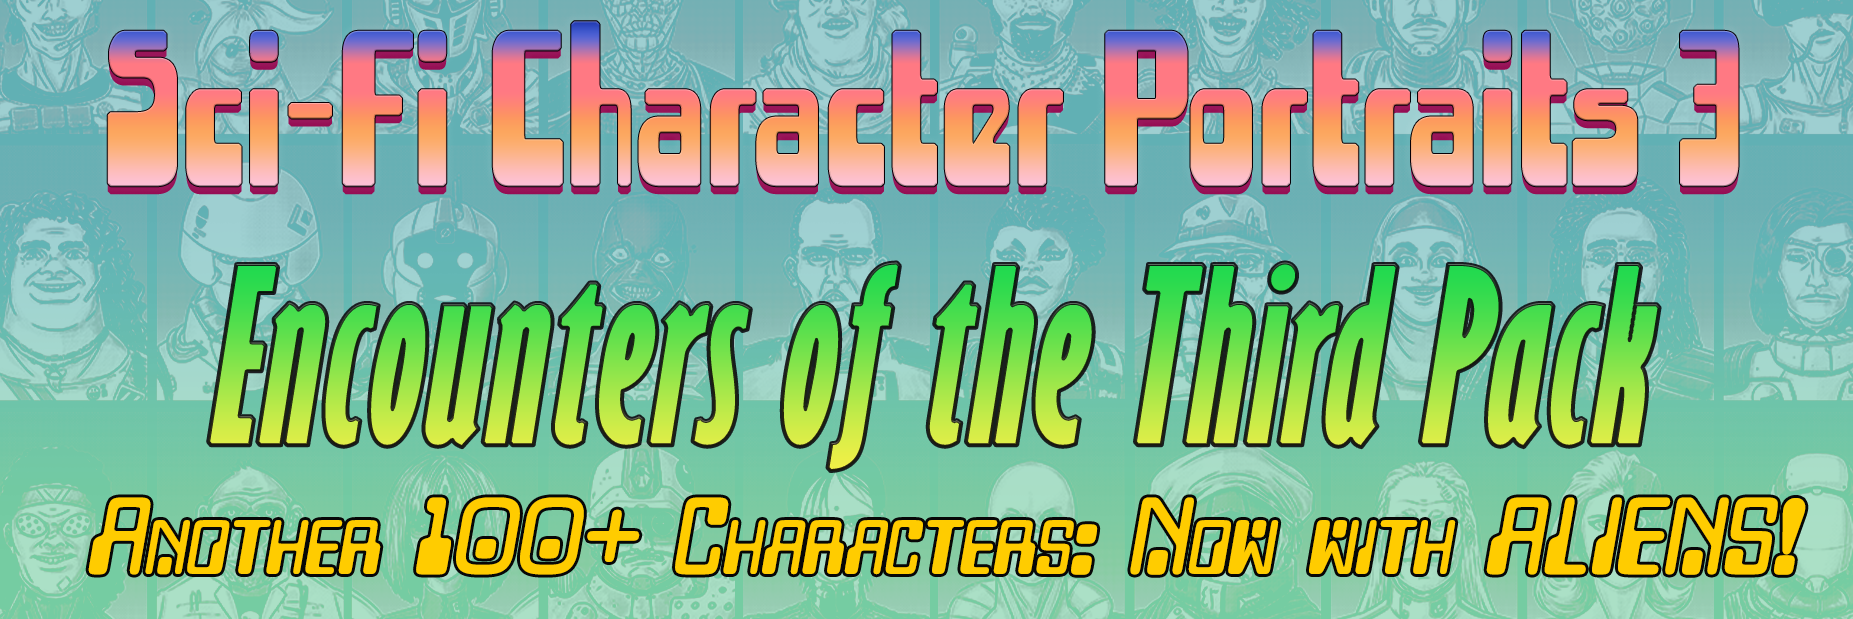 Sci-Fi Character Portraits 3: Encounters of the Third Pack